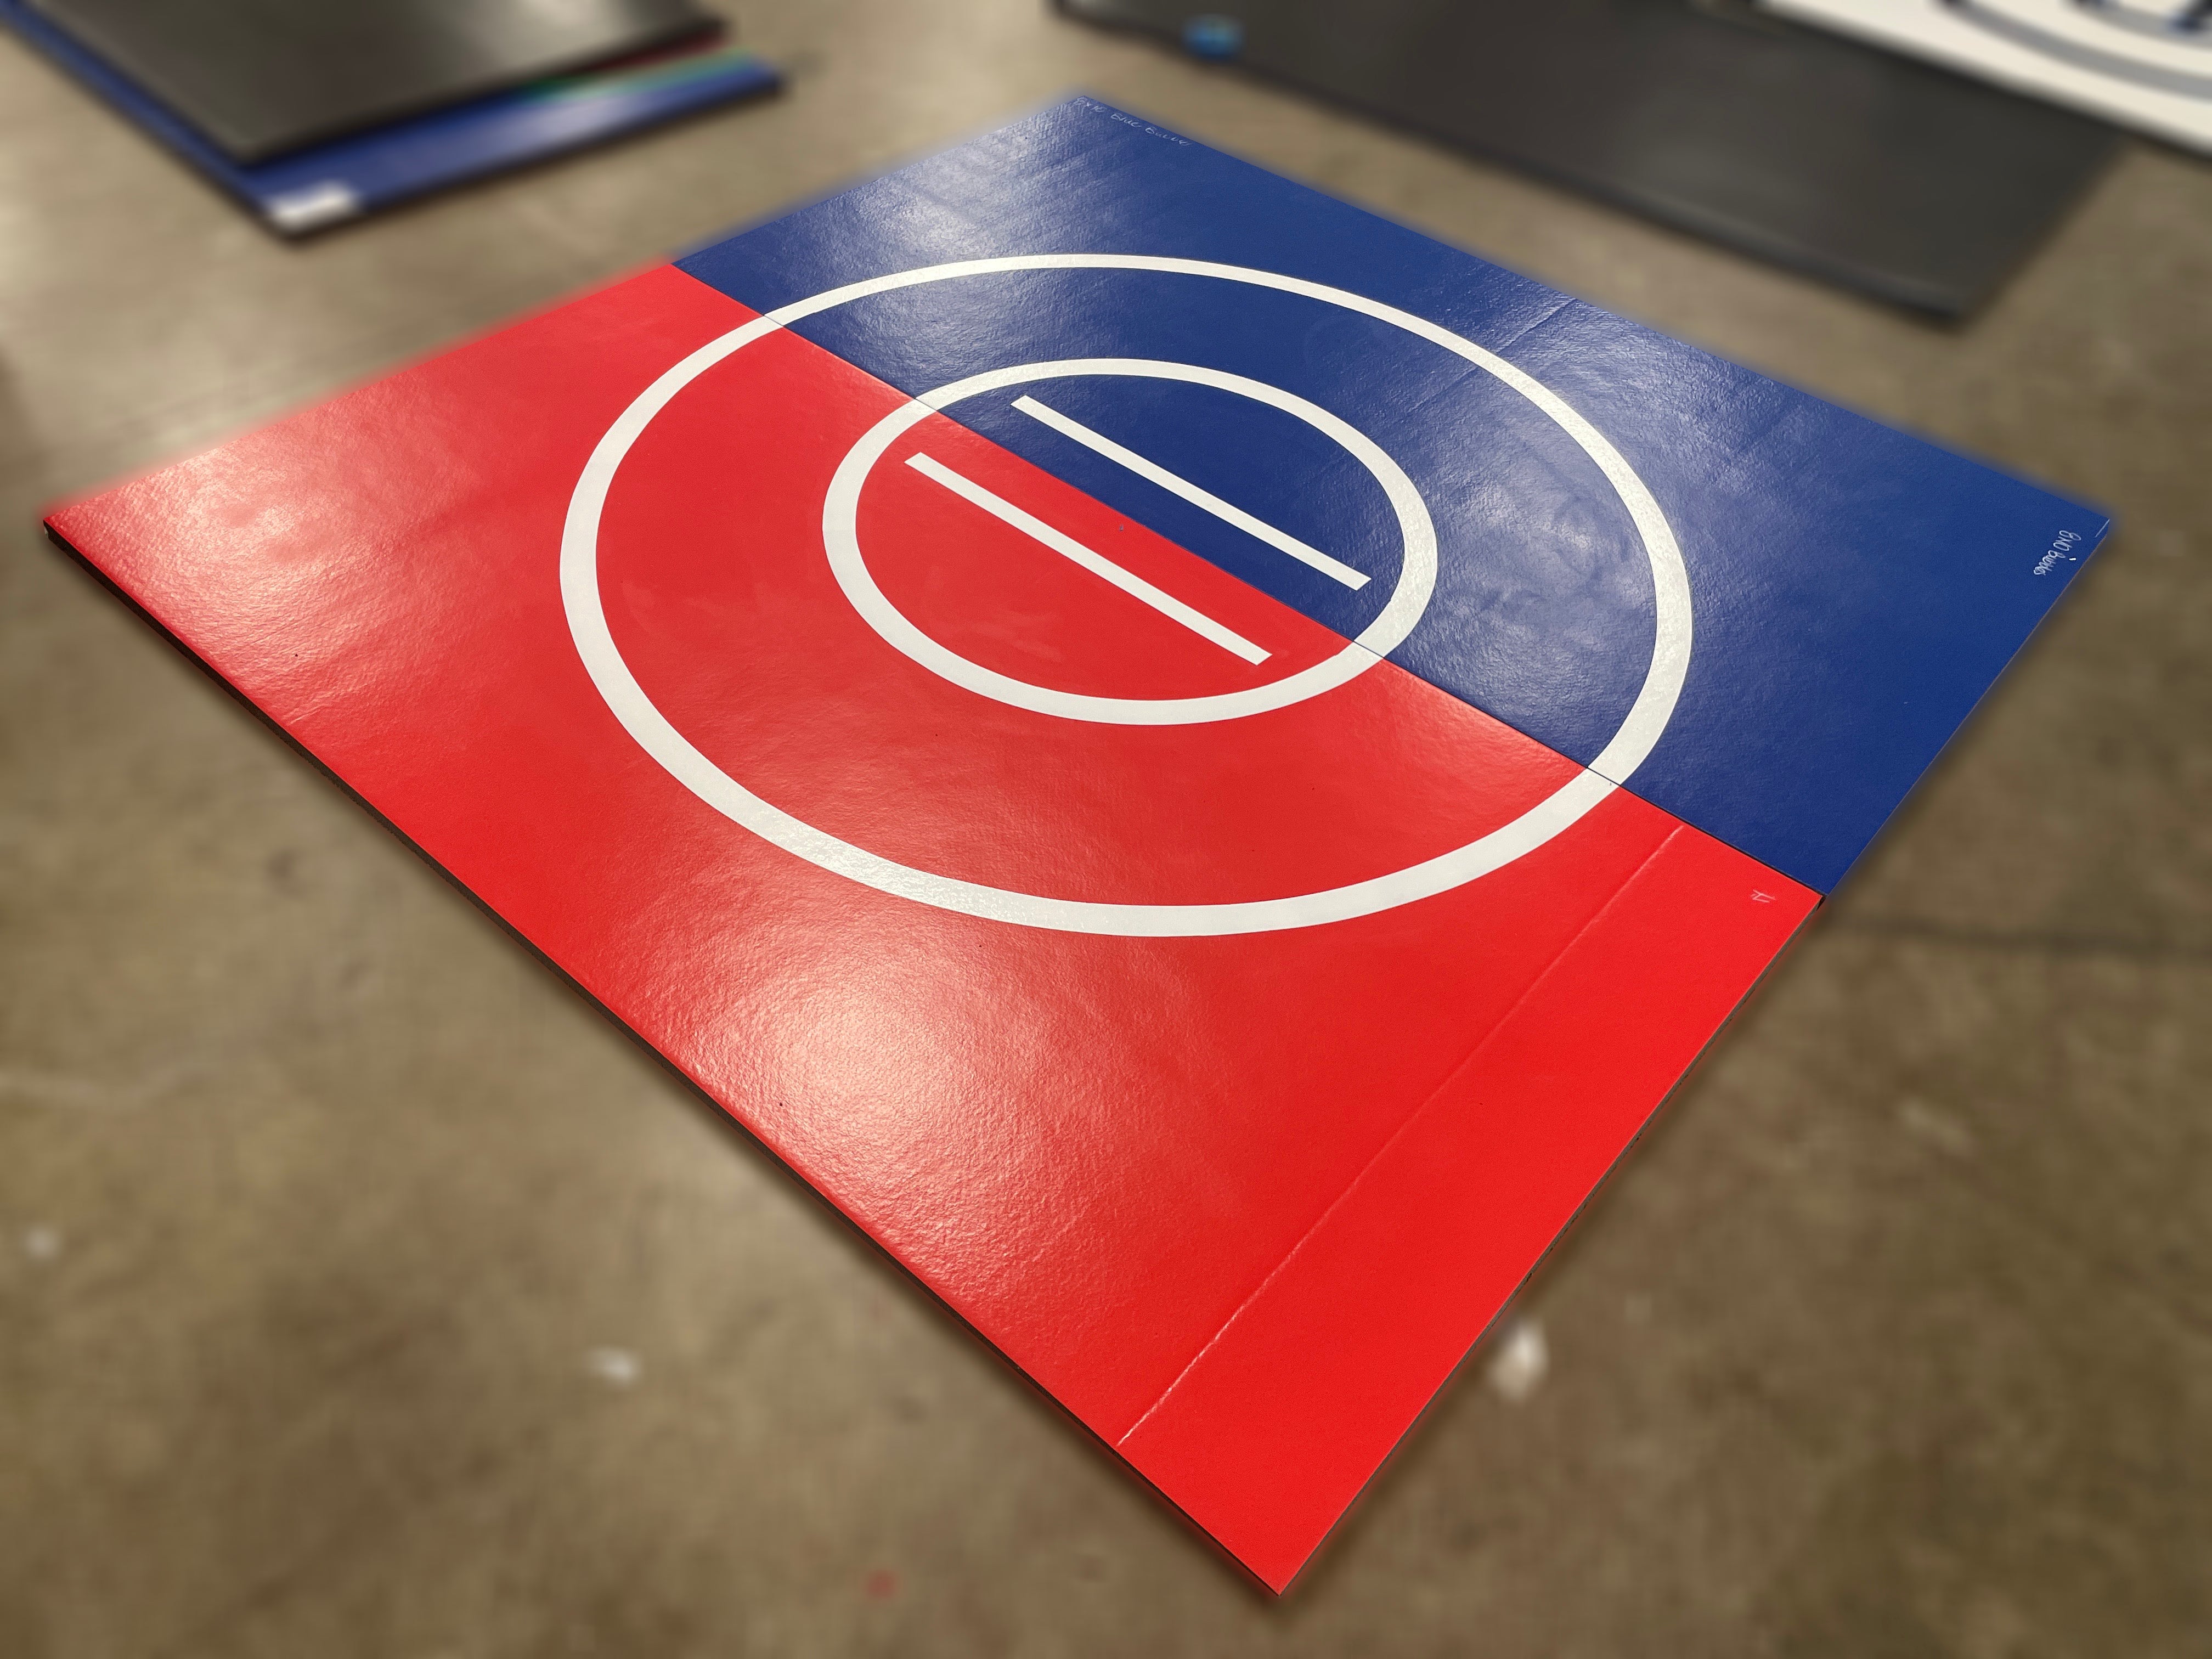 Clearance 8' x 8' x 1 3/8" Roll-Up wrestling Mat Blue and Red Vinyl Flaw